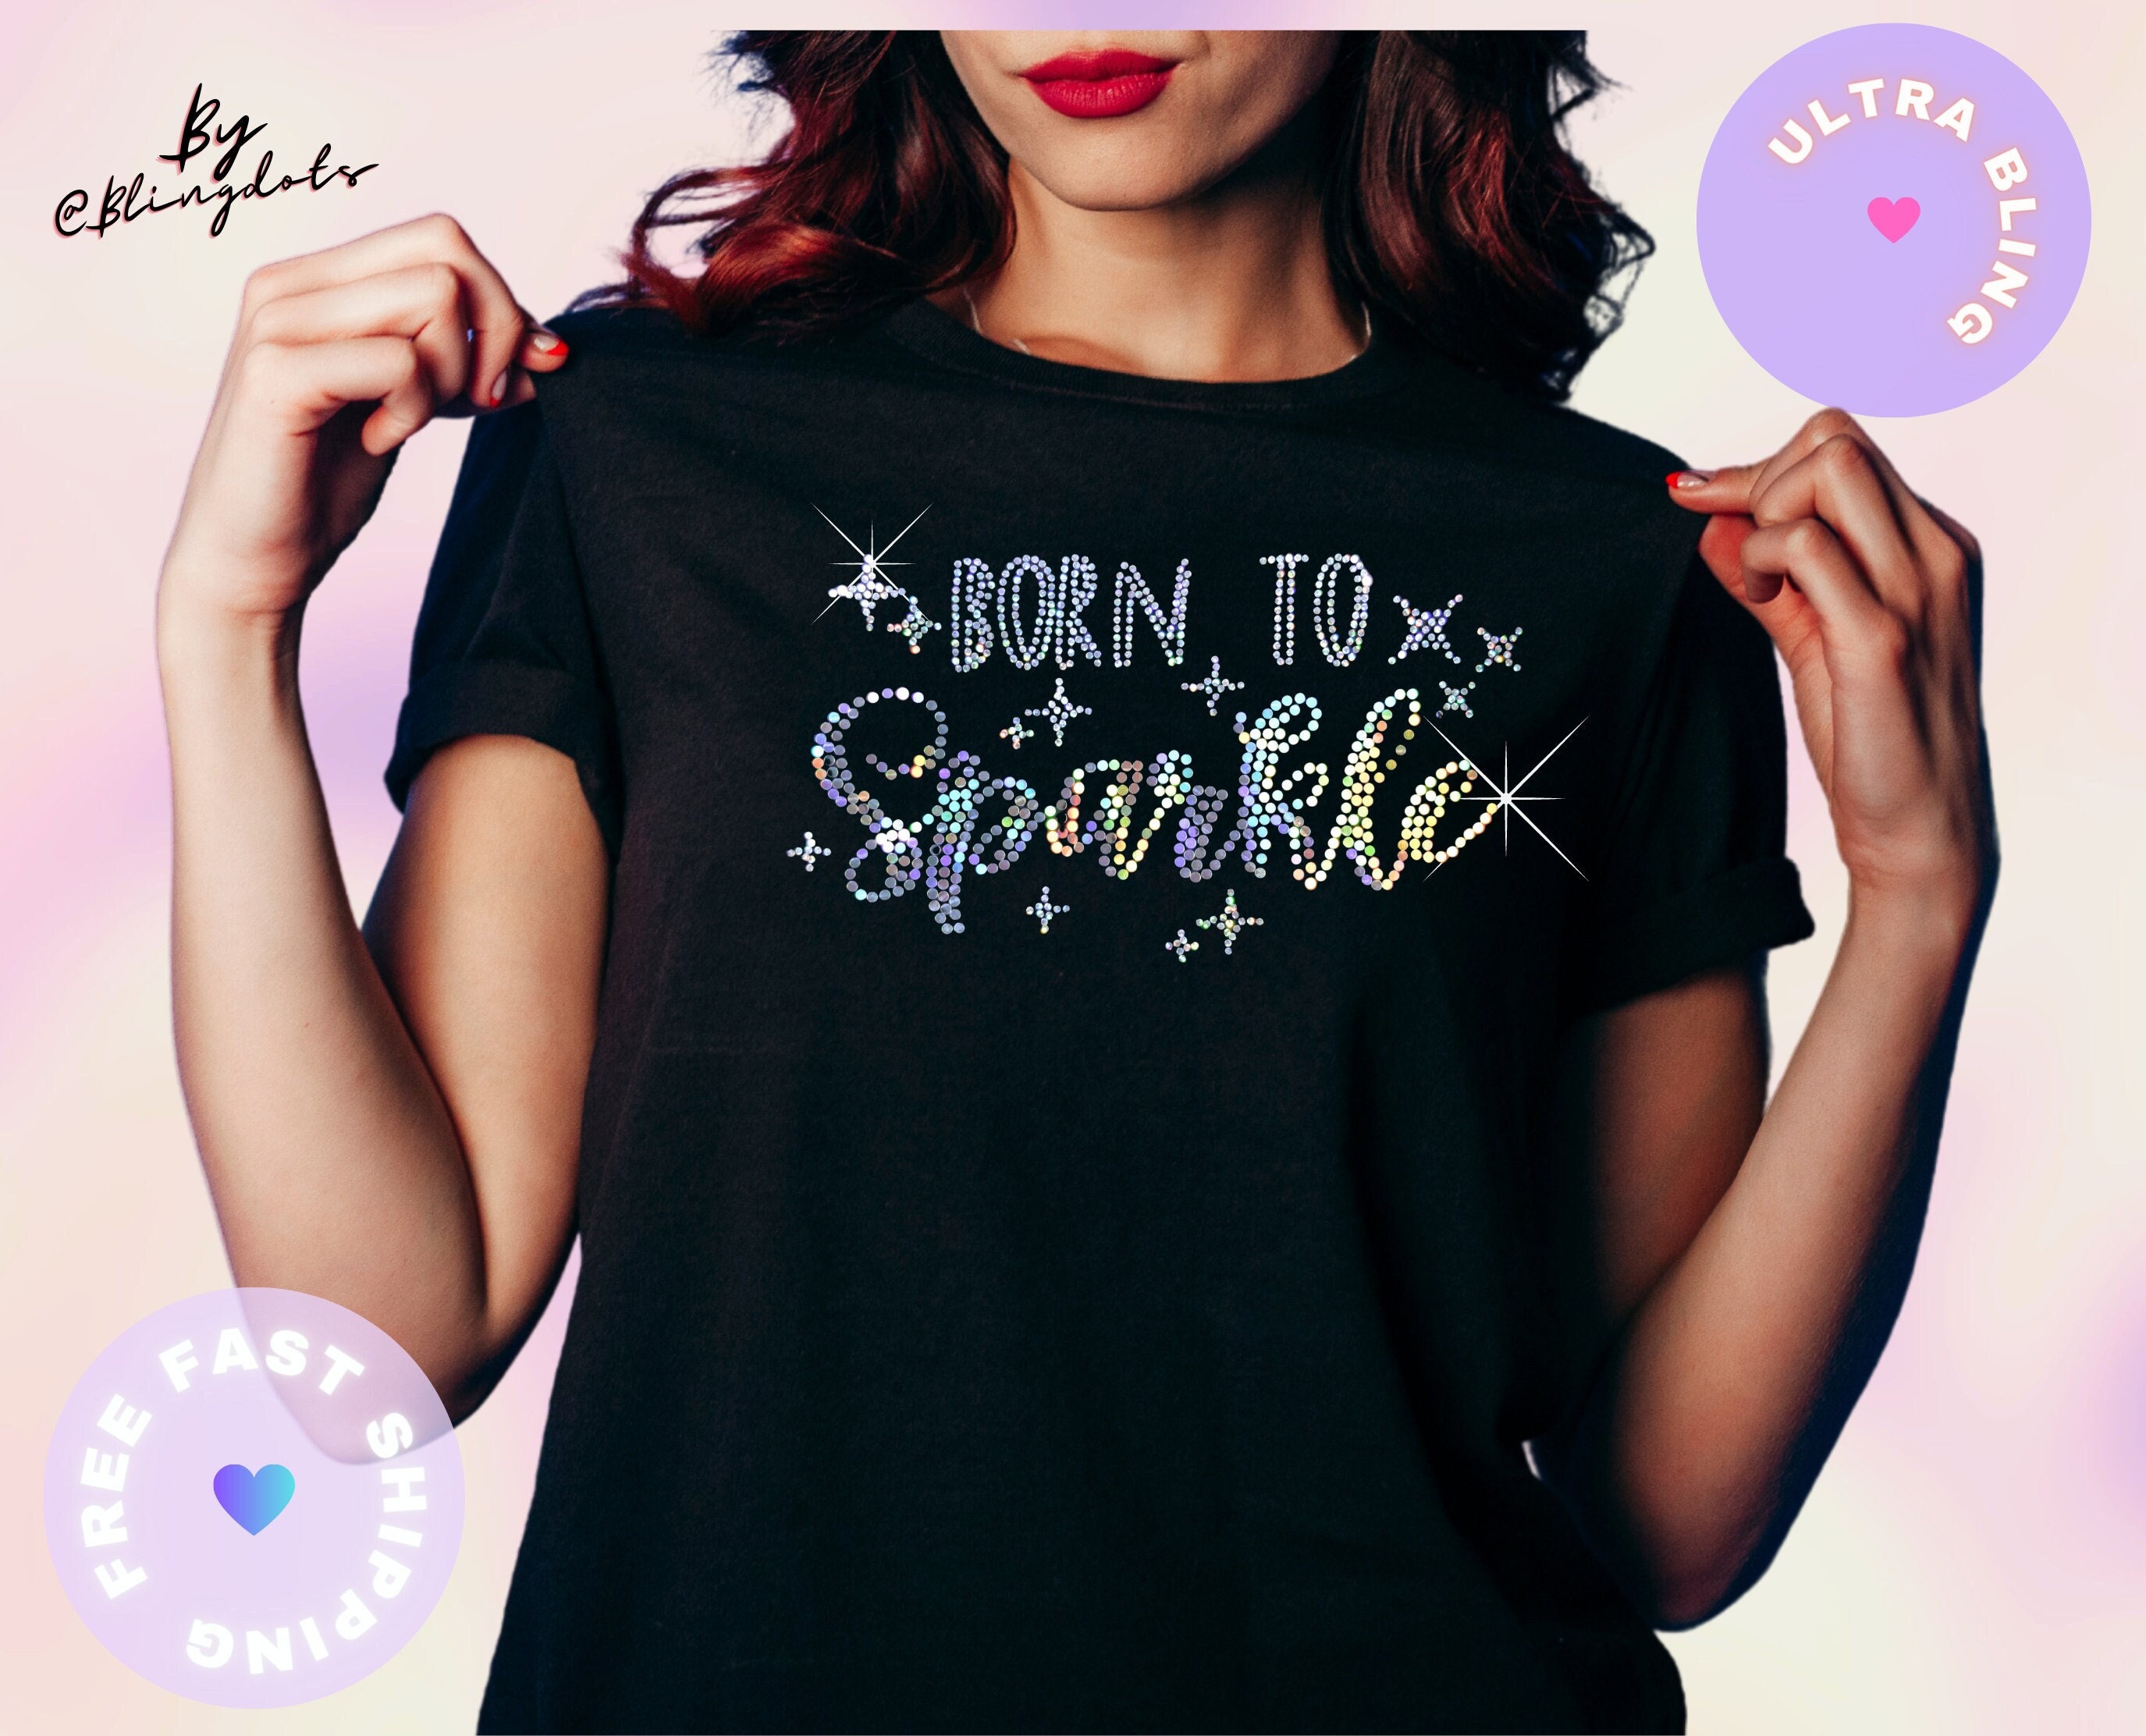 Born to Sparkle Bling Shirt, Shine, Party Theme, Sequins Tank, Woman  Trending Tee, Motivational, Glitter -  Canada